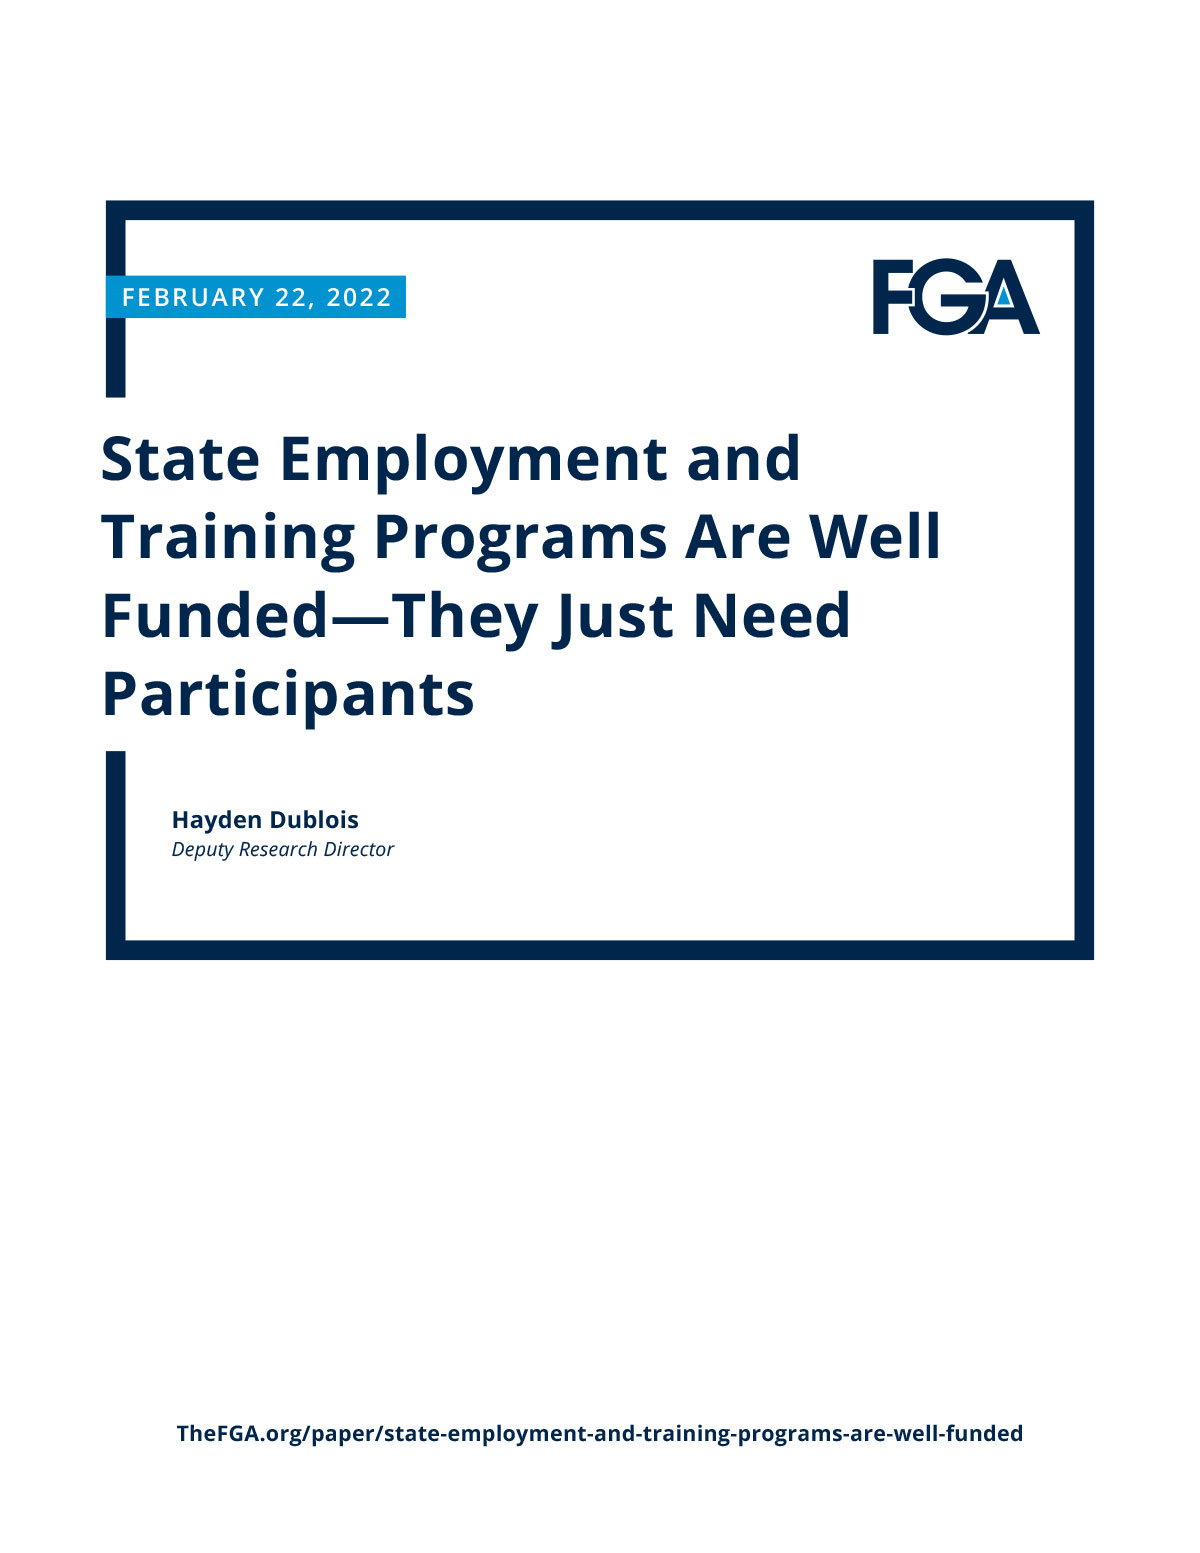 State Employment and Training Programs Are Well Funded—They Just Need Participants